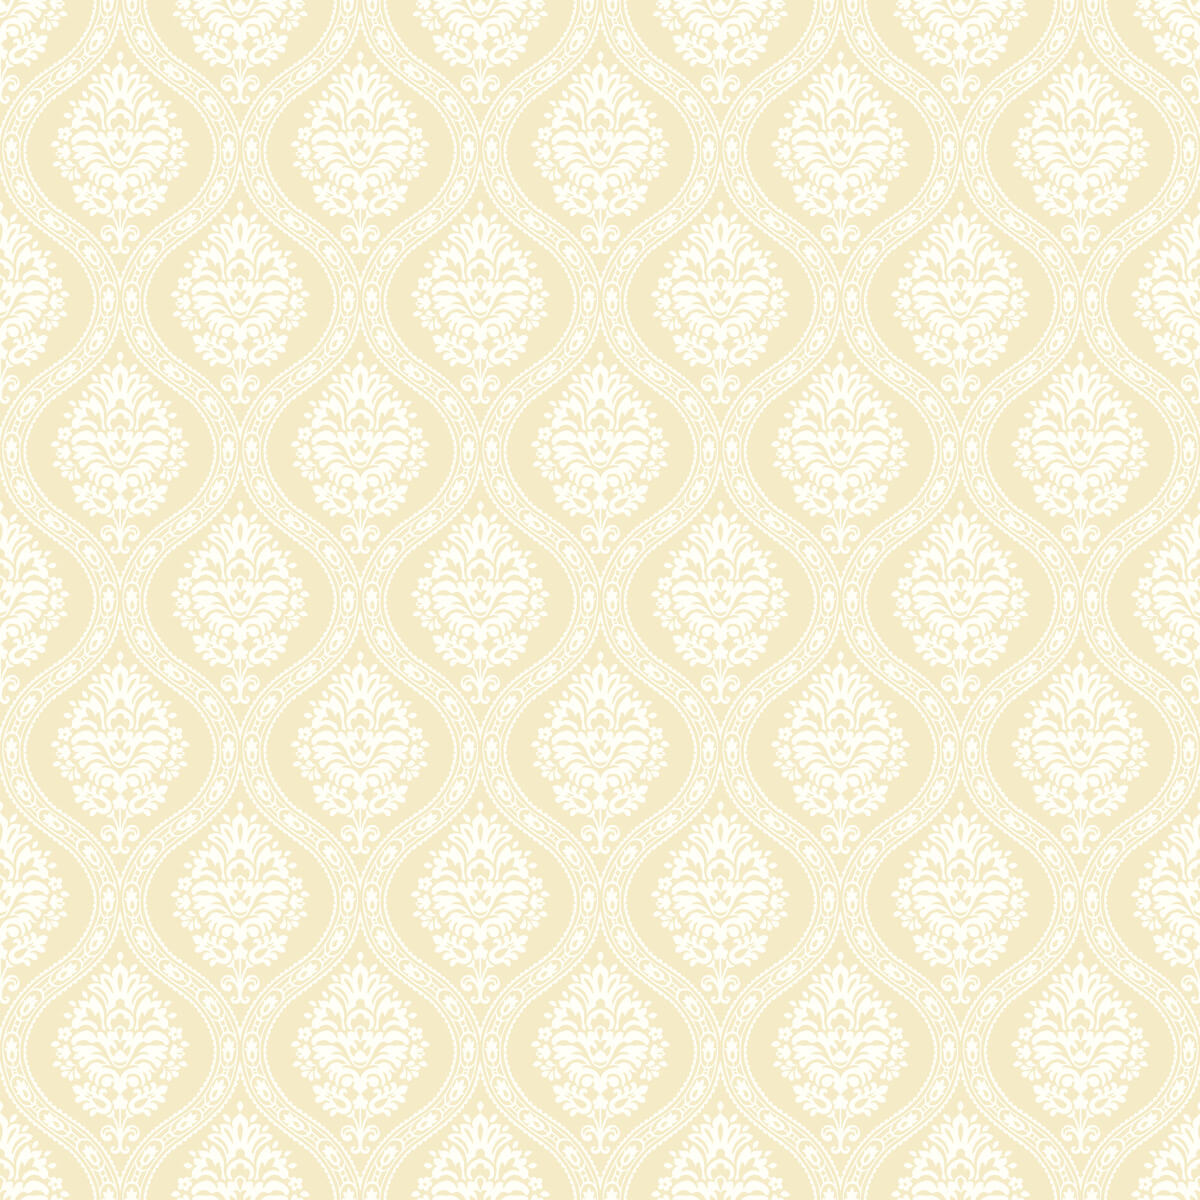 Damask Resource Library Petite Ogee Wallpaper - Cream